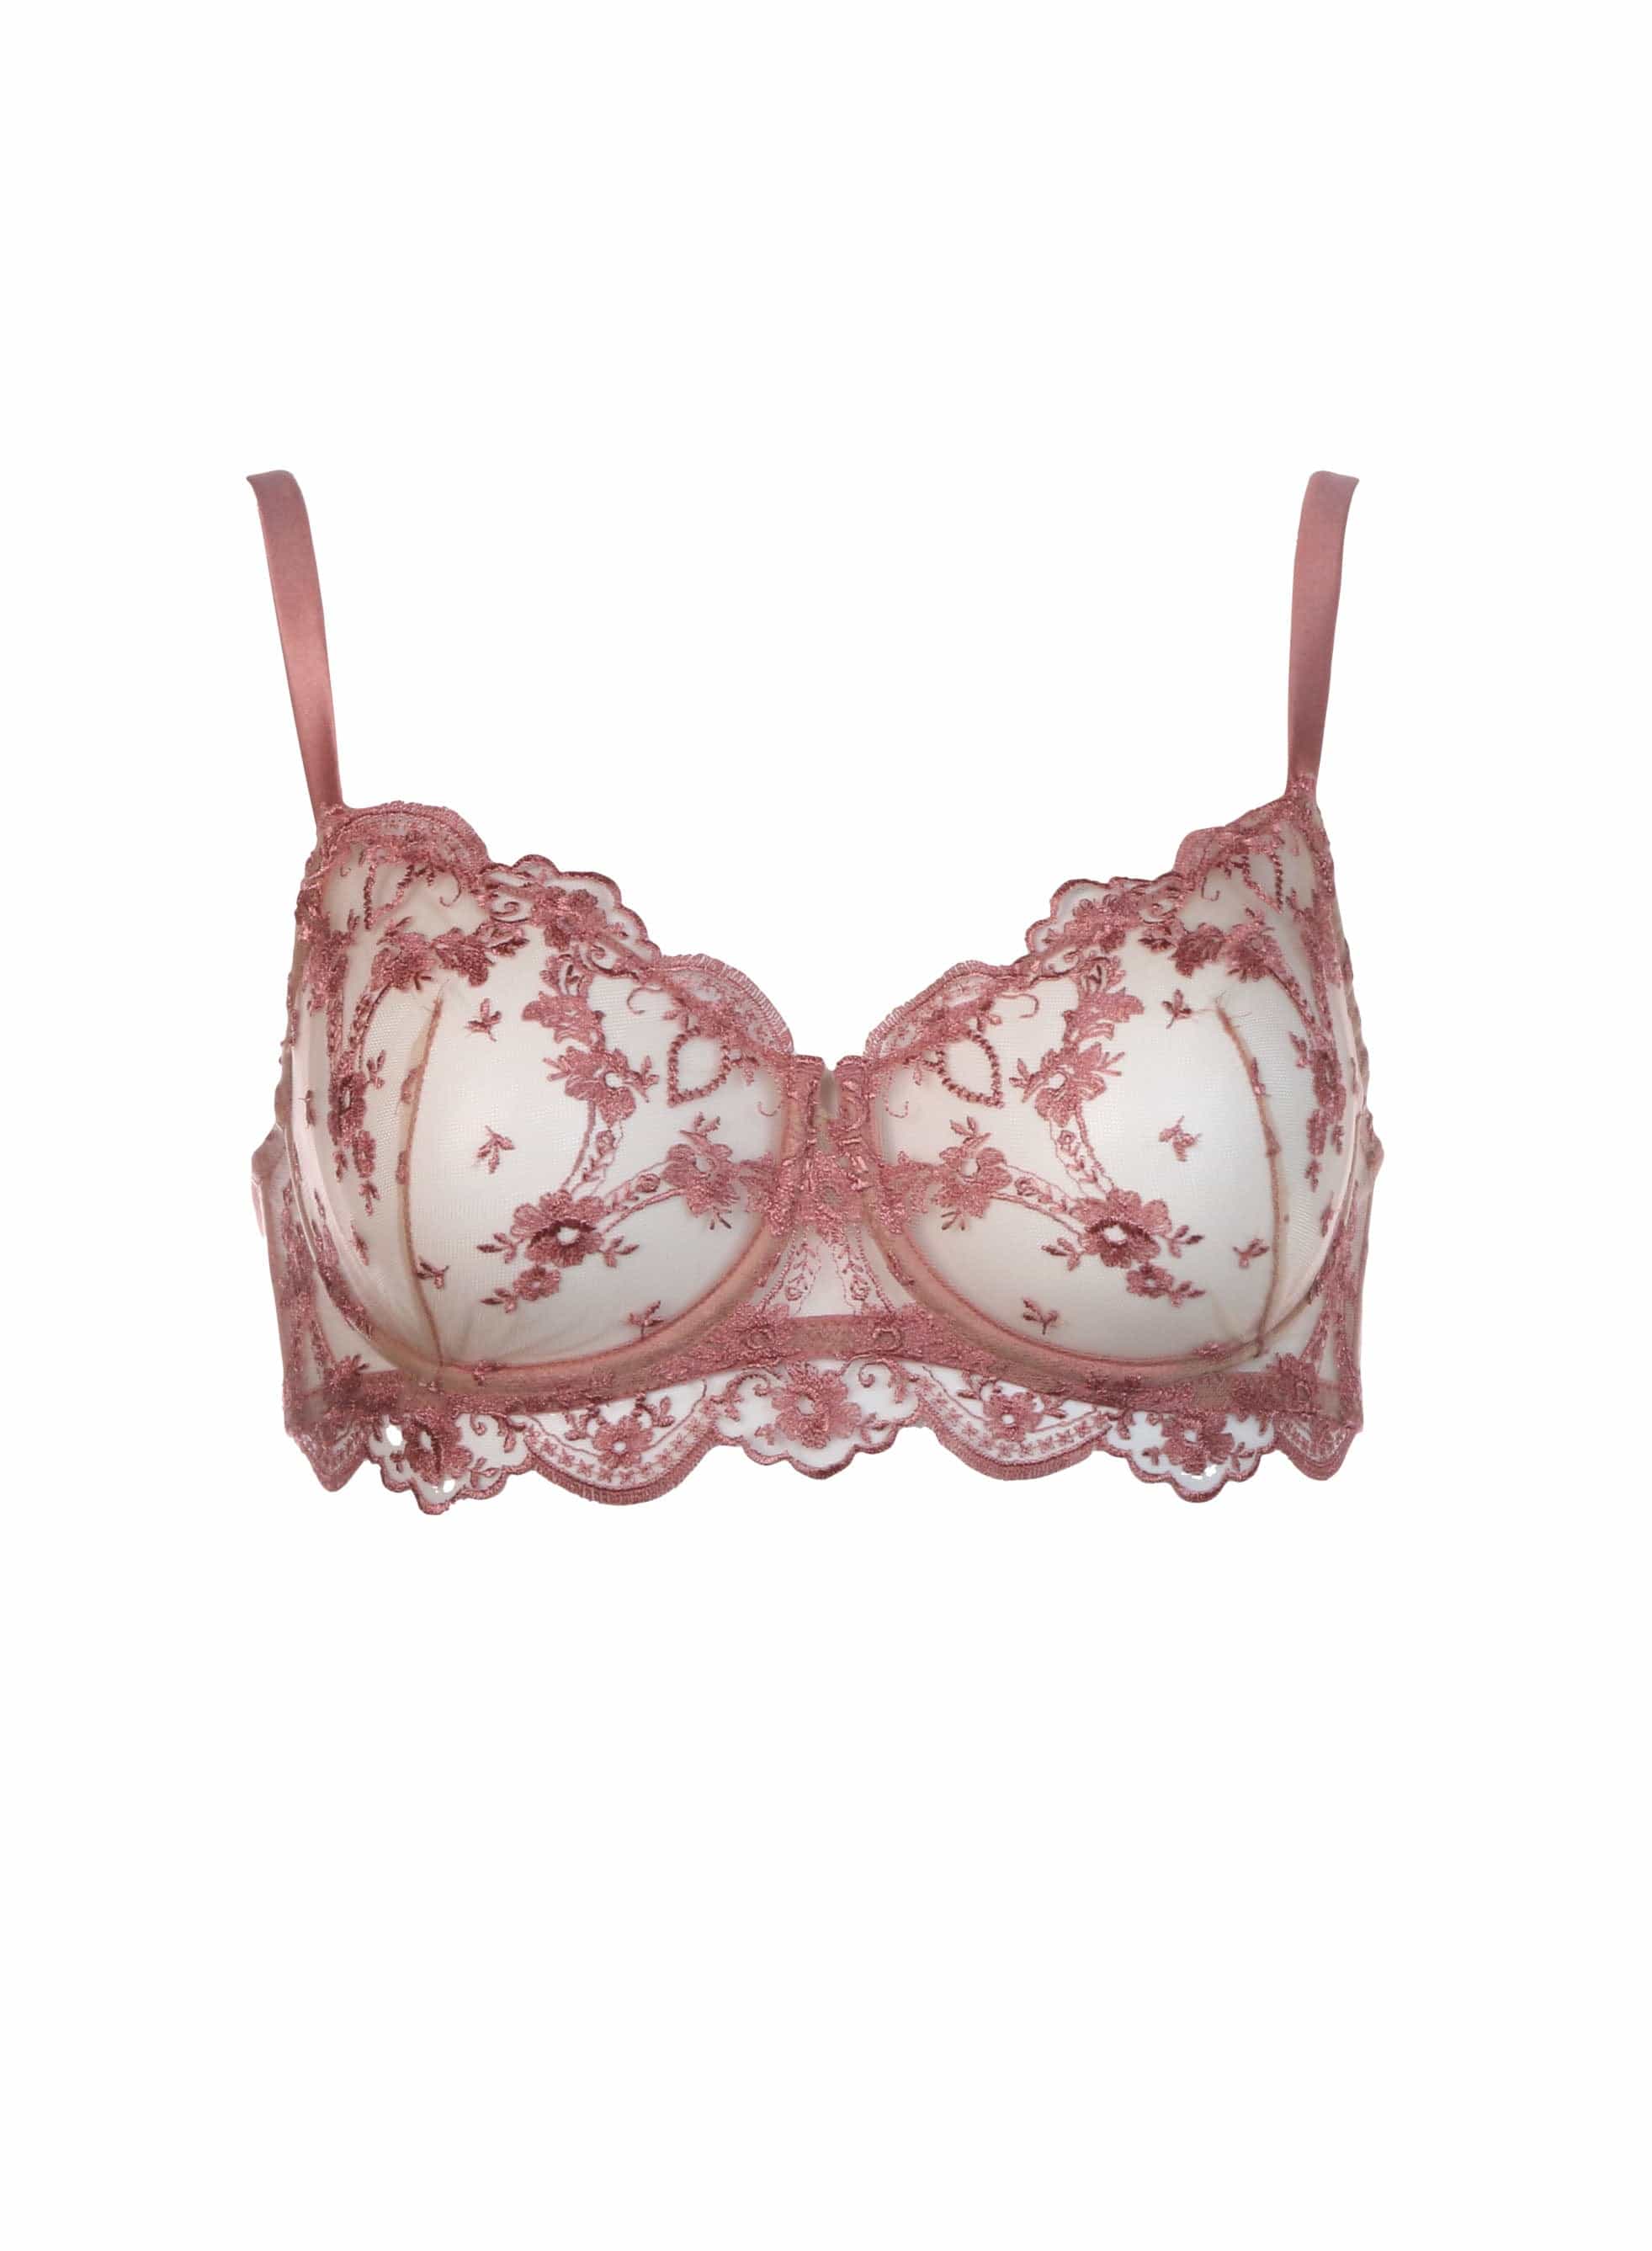 Buy Longline Bra Size 36 USA B Cup 14 au B Cup Online in India 